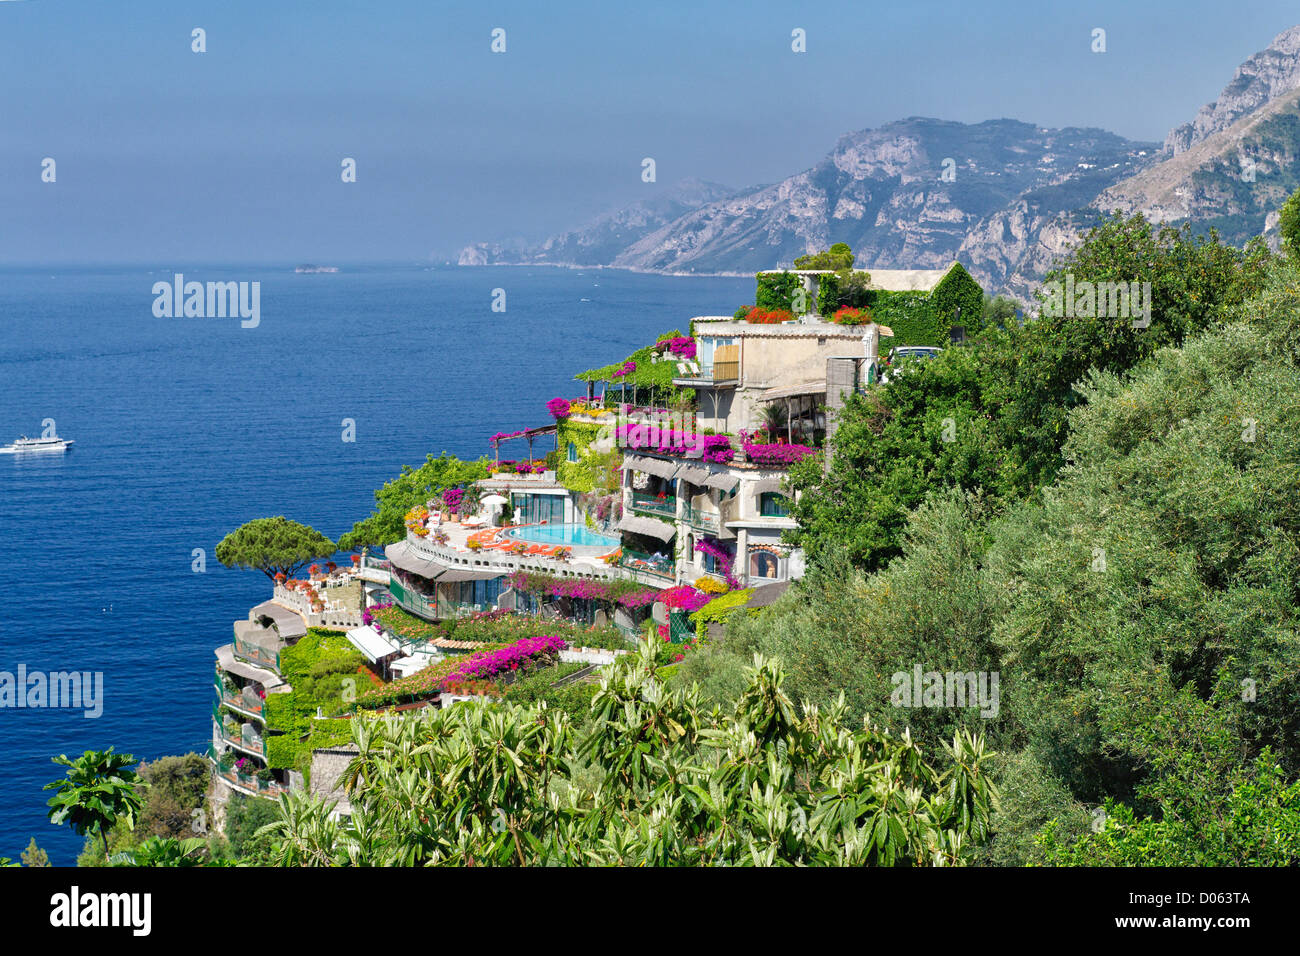 High Angle View of a Luxury Hotel IL San Pietro, Positano, Campanie, Italie Banque D'Images